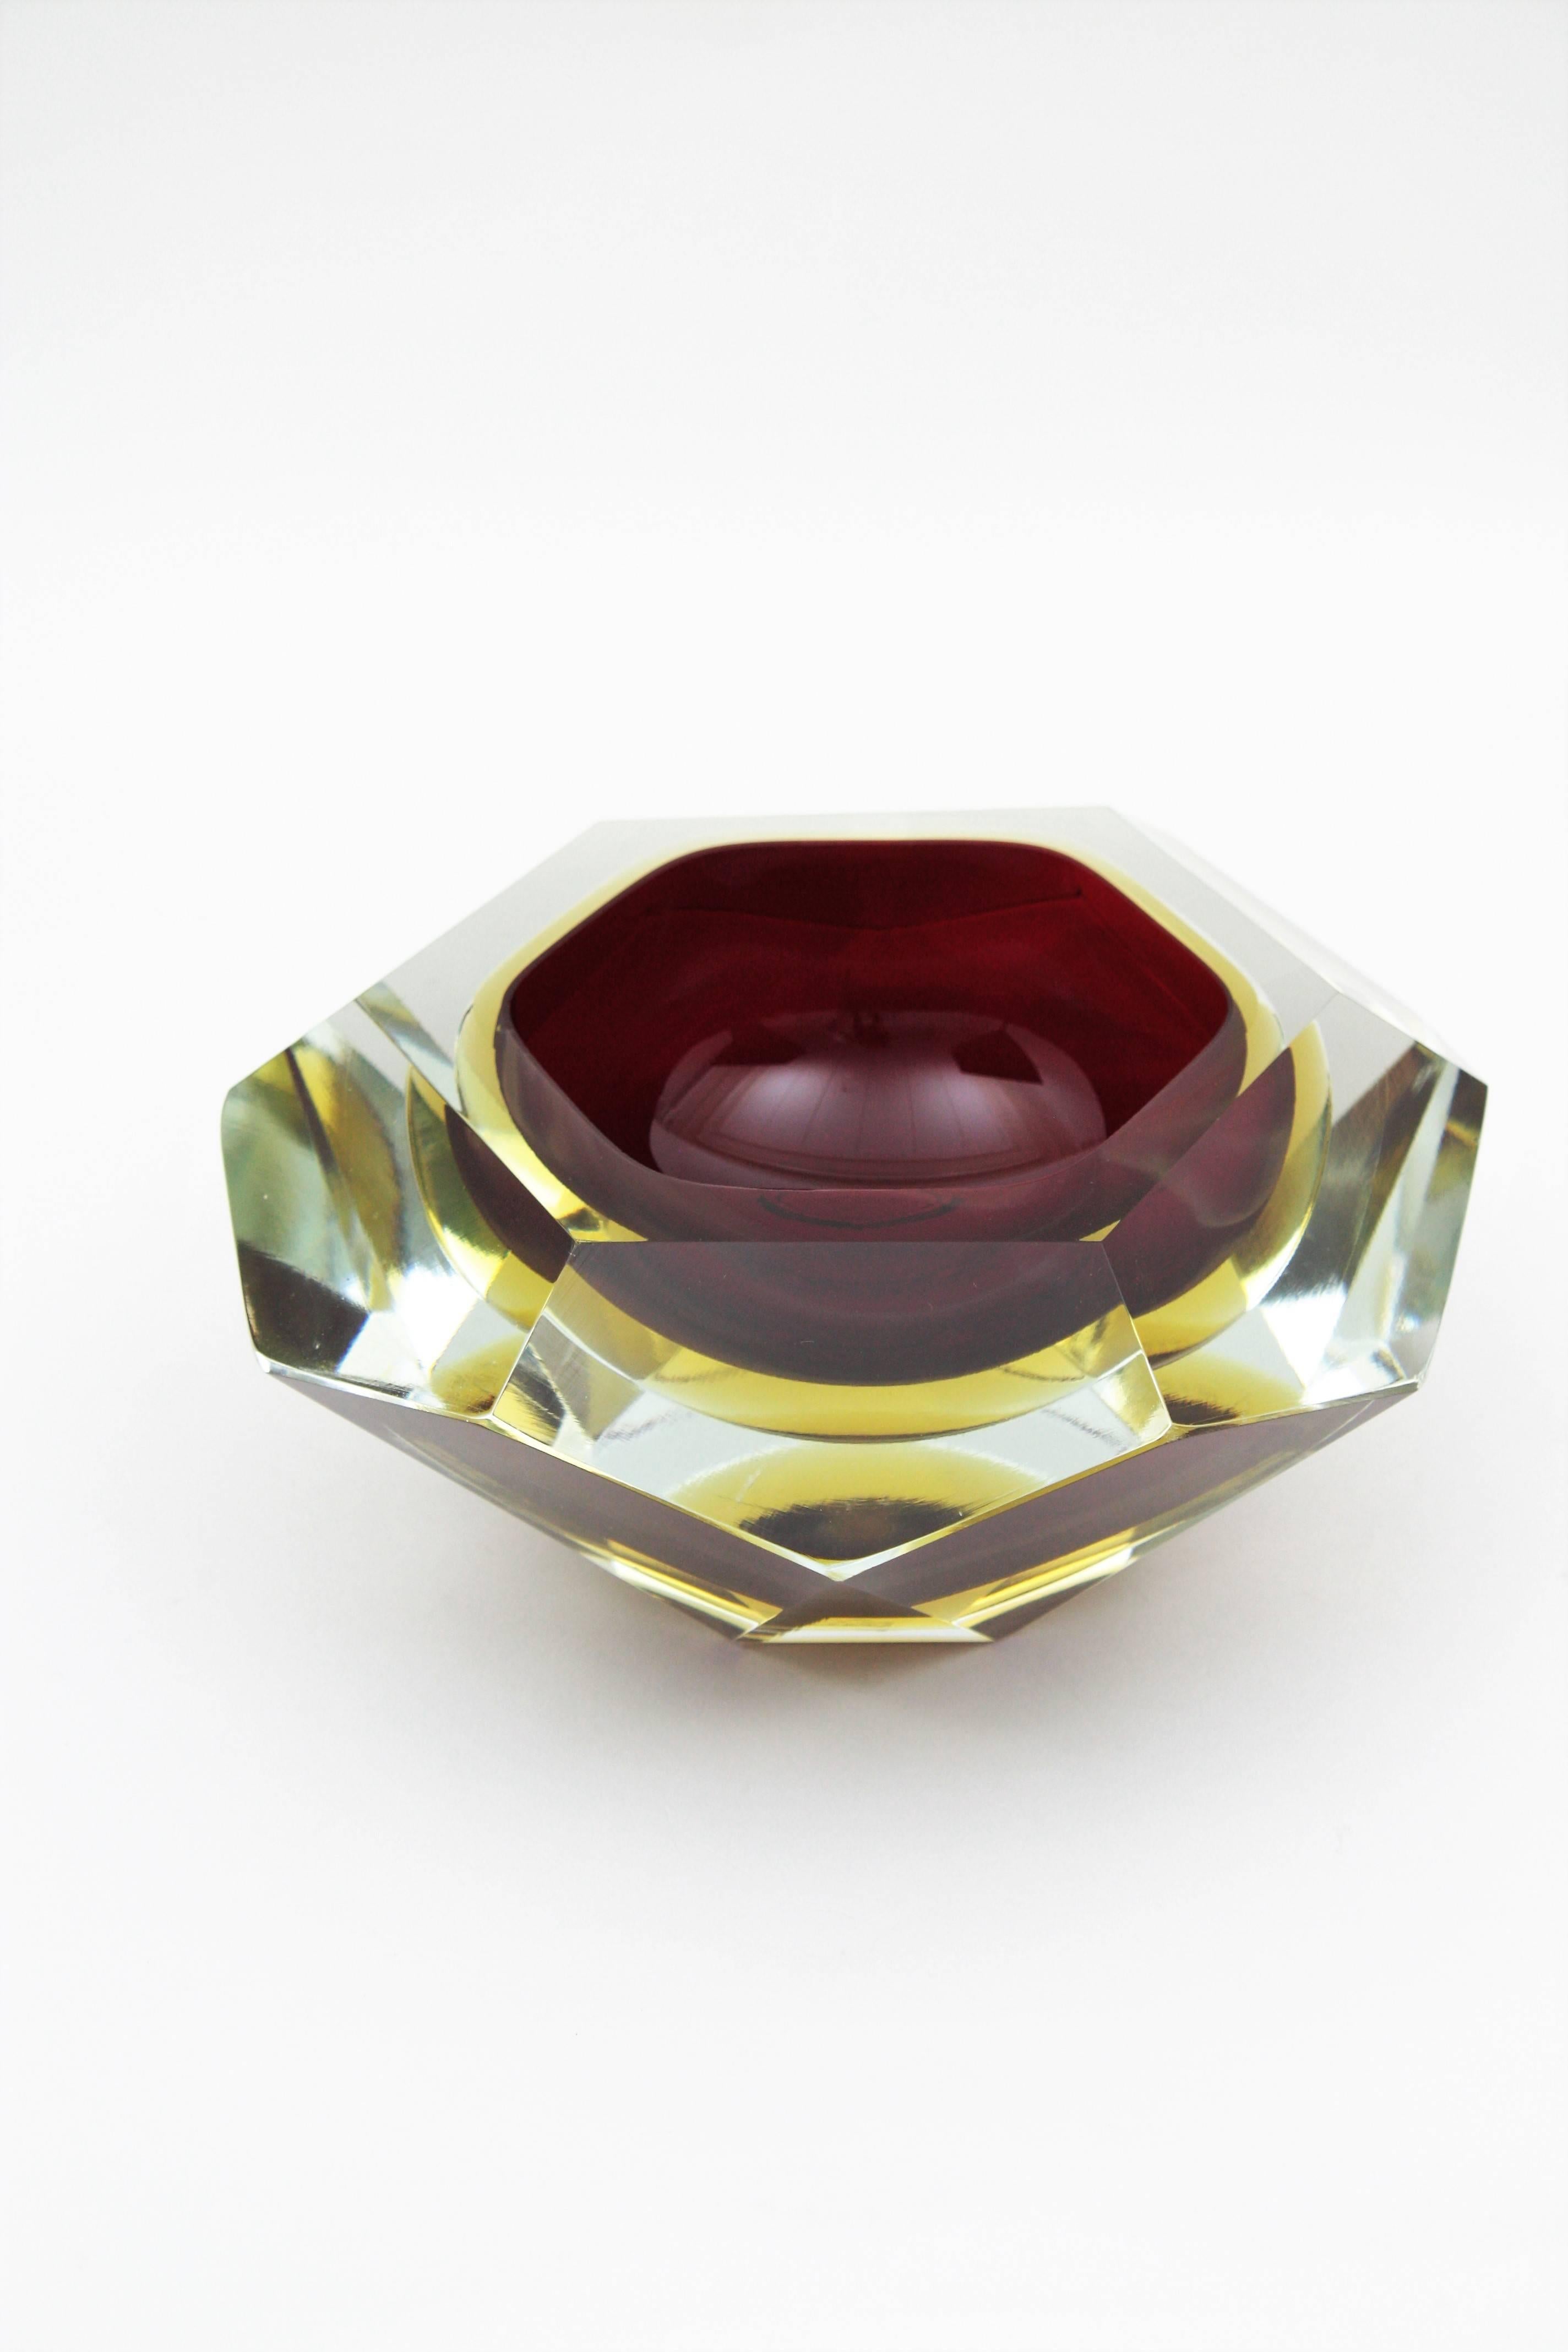 Giant Flavio Poli Ruby and Yellow Diamond Shaped Faceted Murano Glass Bowl 1